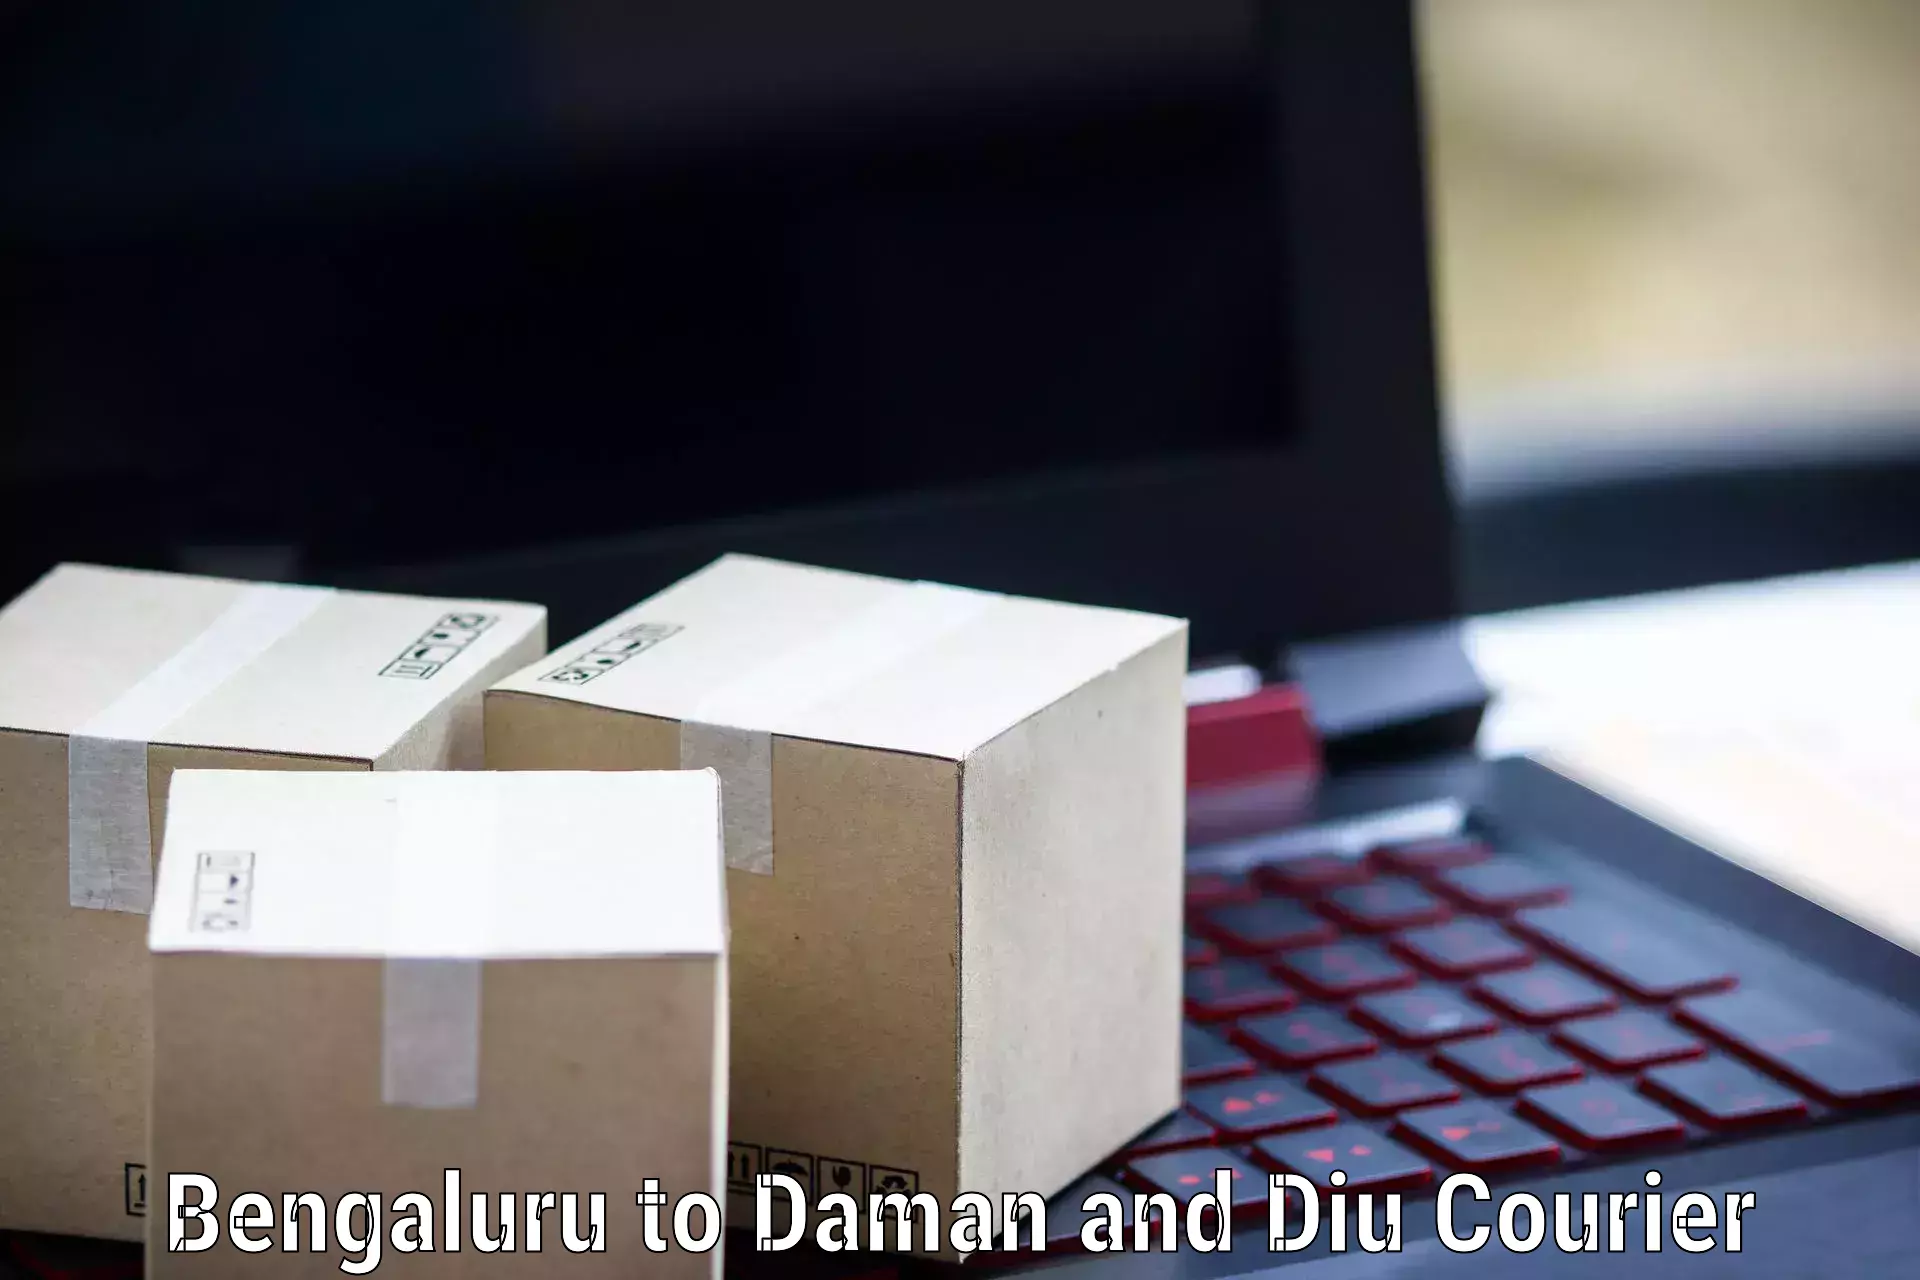 Cash on delivery service Bengaluru to Daman and Diu